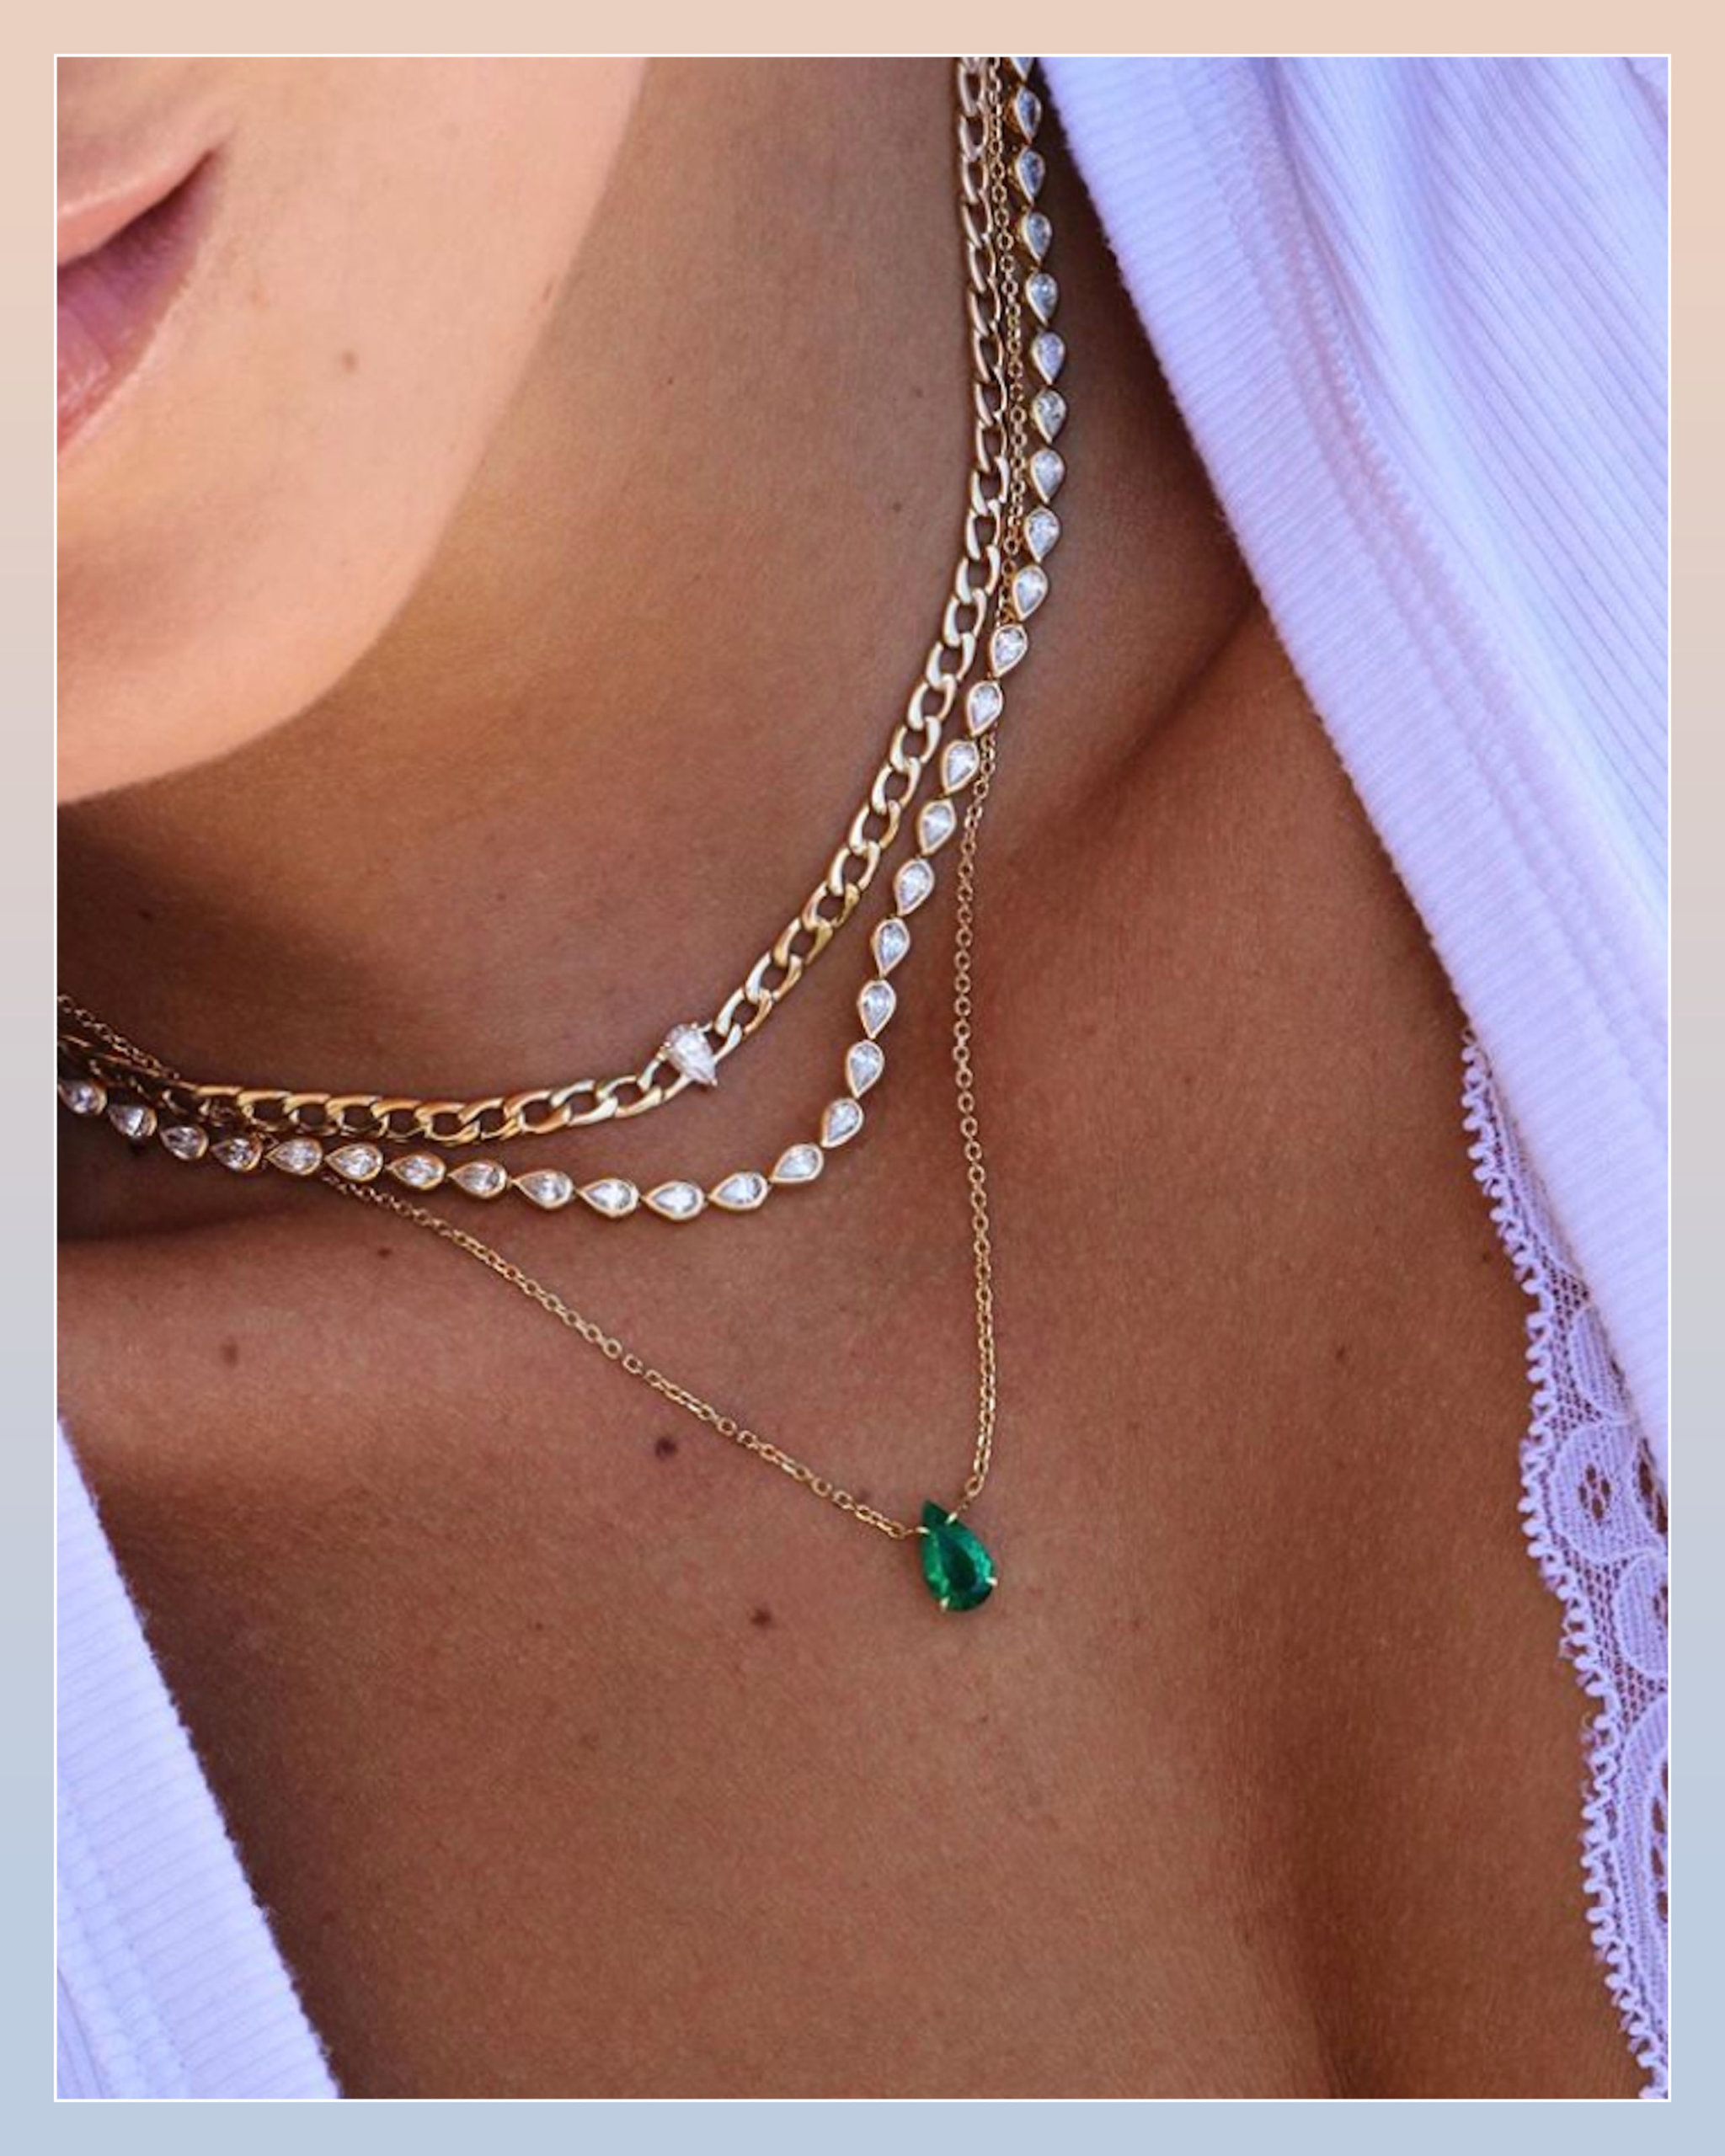 Pear shaped diamond riviere necklace paired with a gold choker necklace and an emerald necklace on a gold chain by Anita Ko